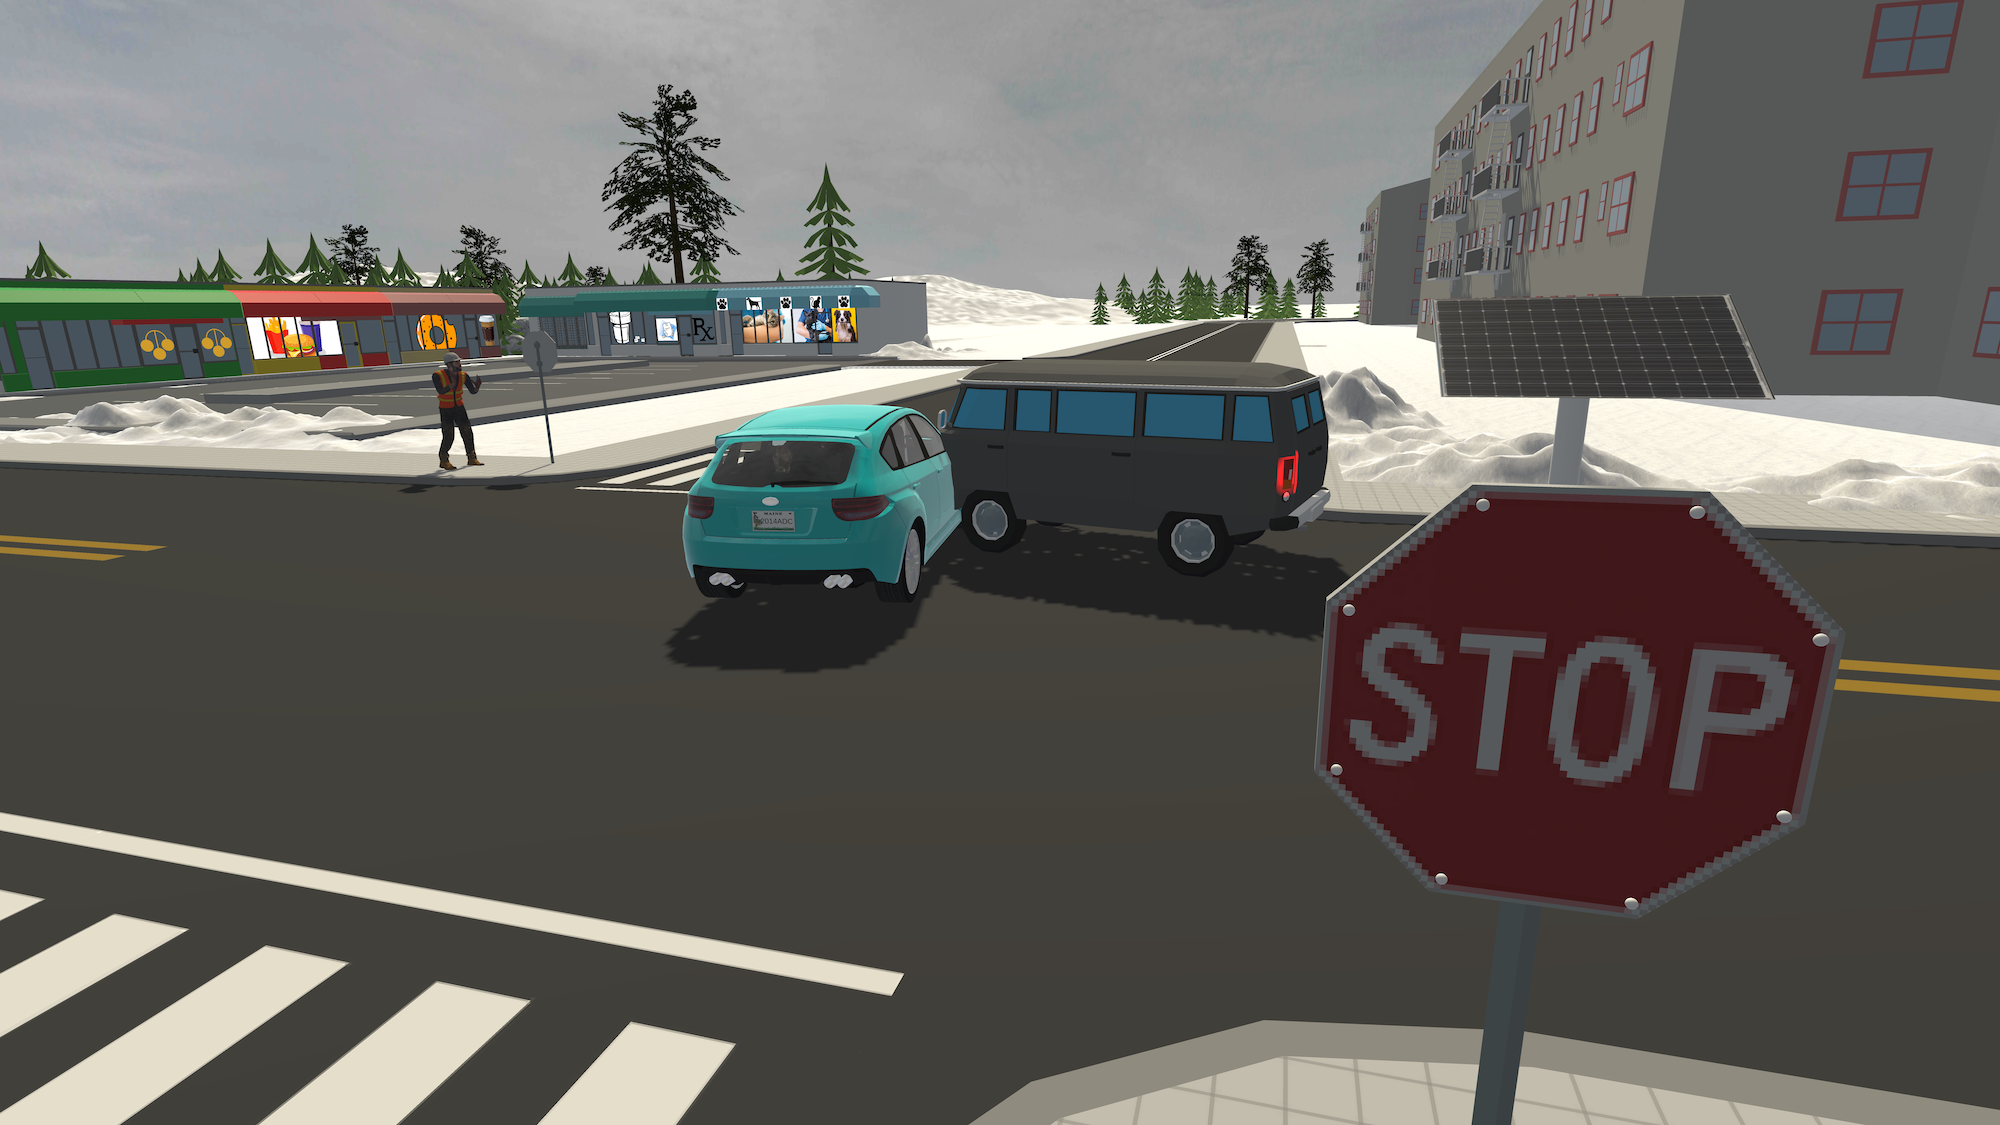 a still image of a virtual reality scenario of two cars crashing on an intersection